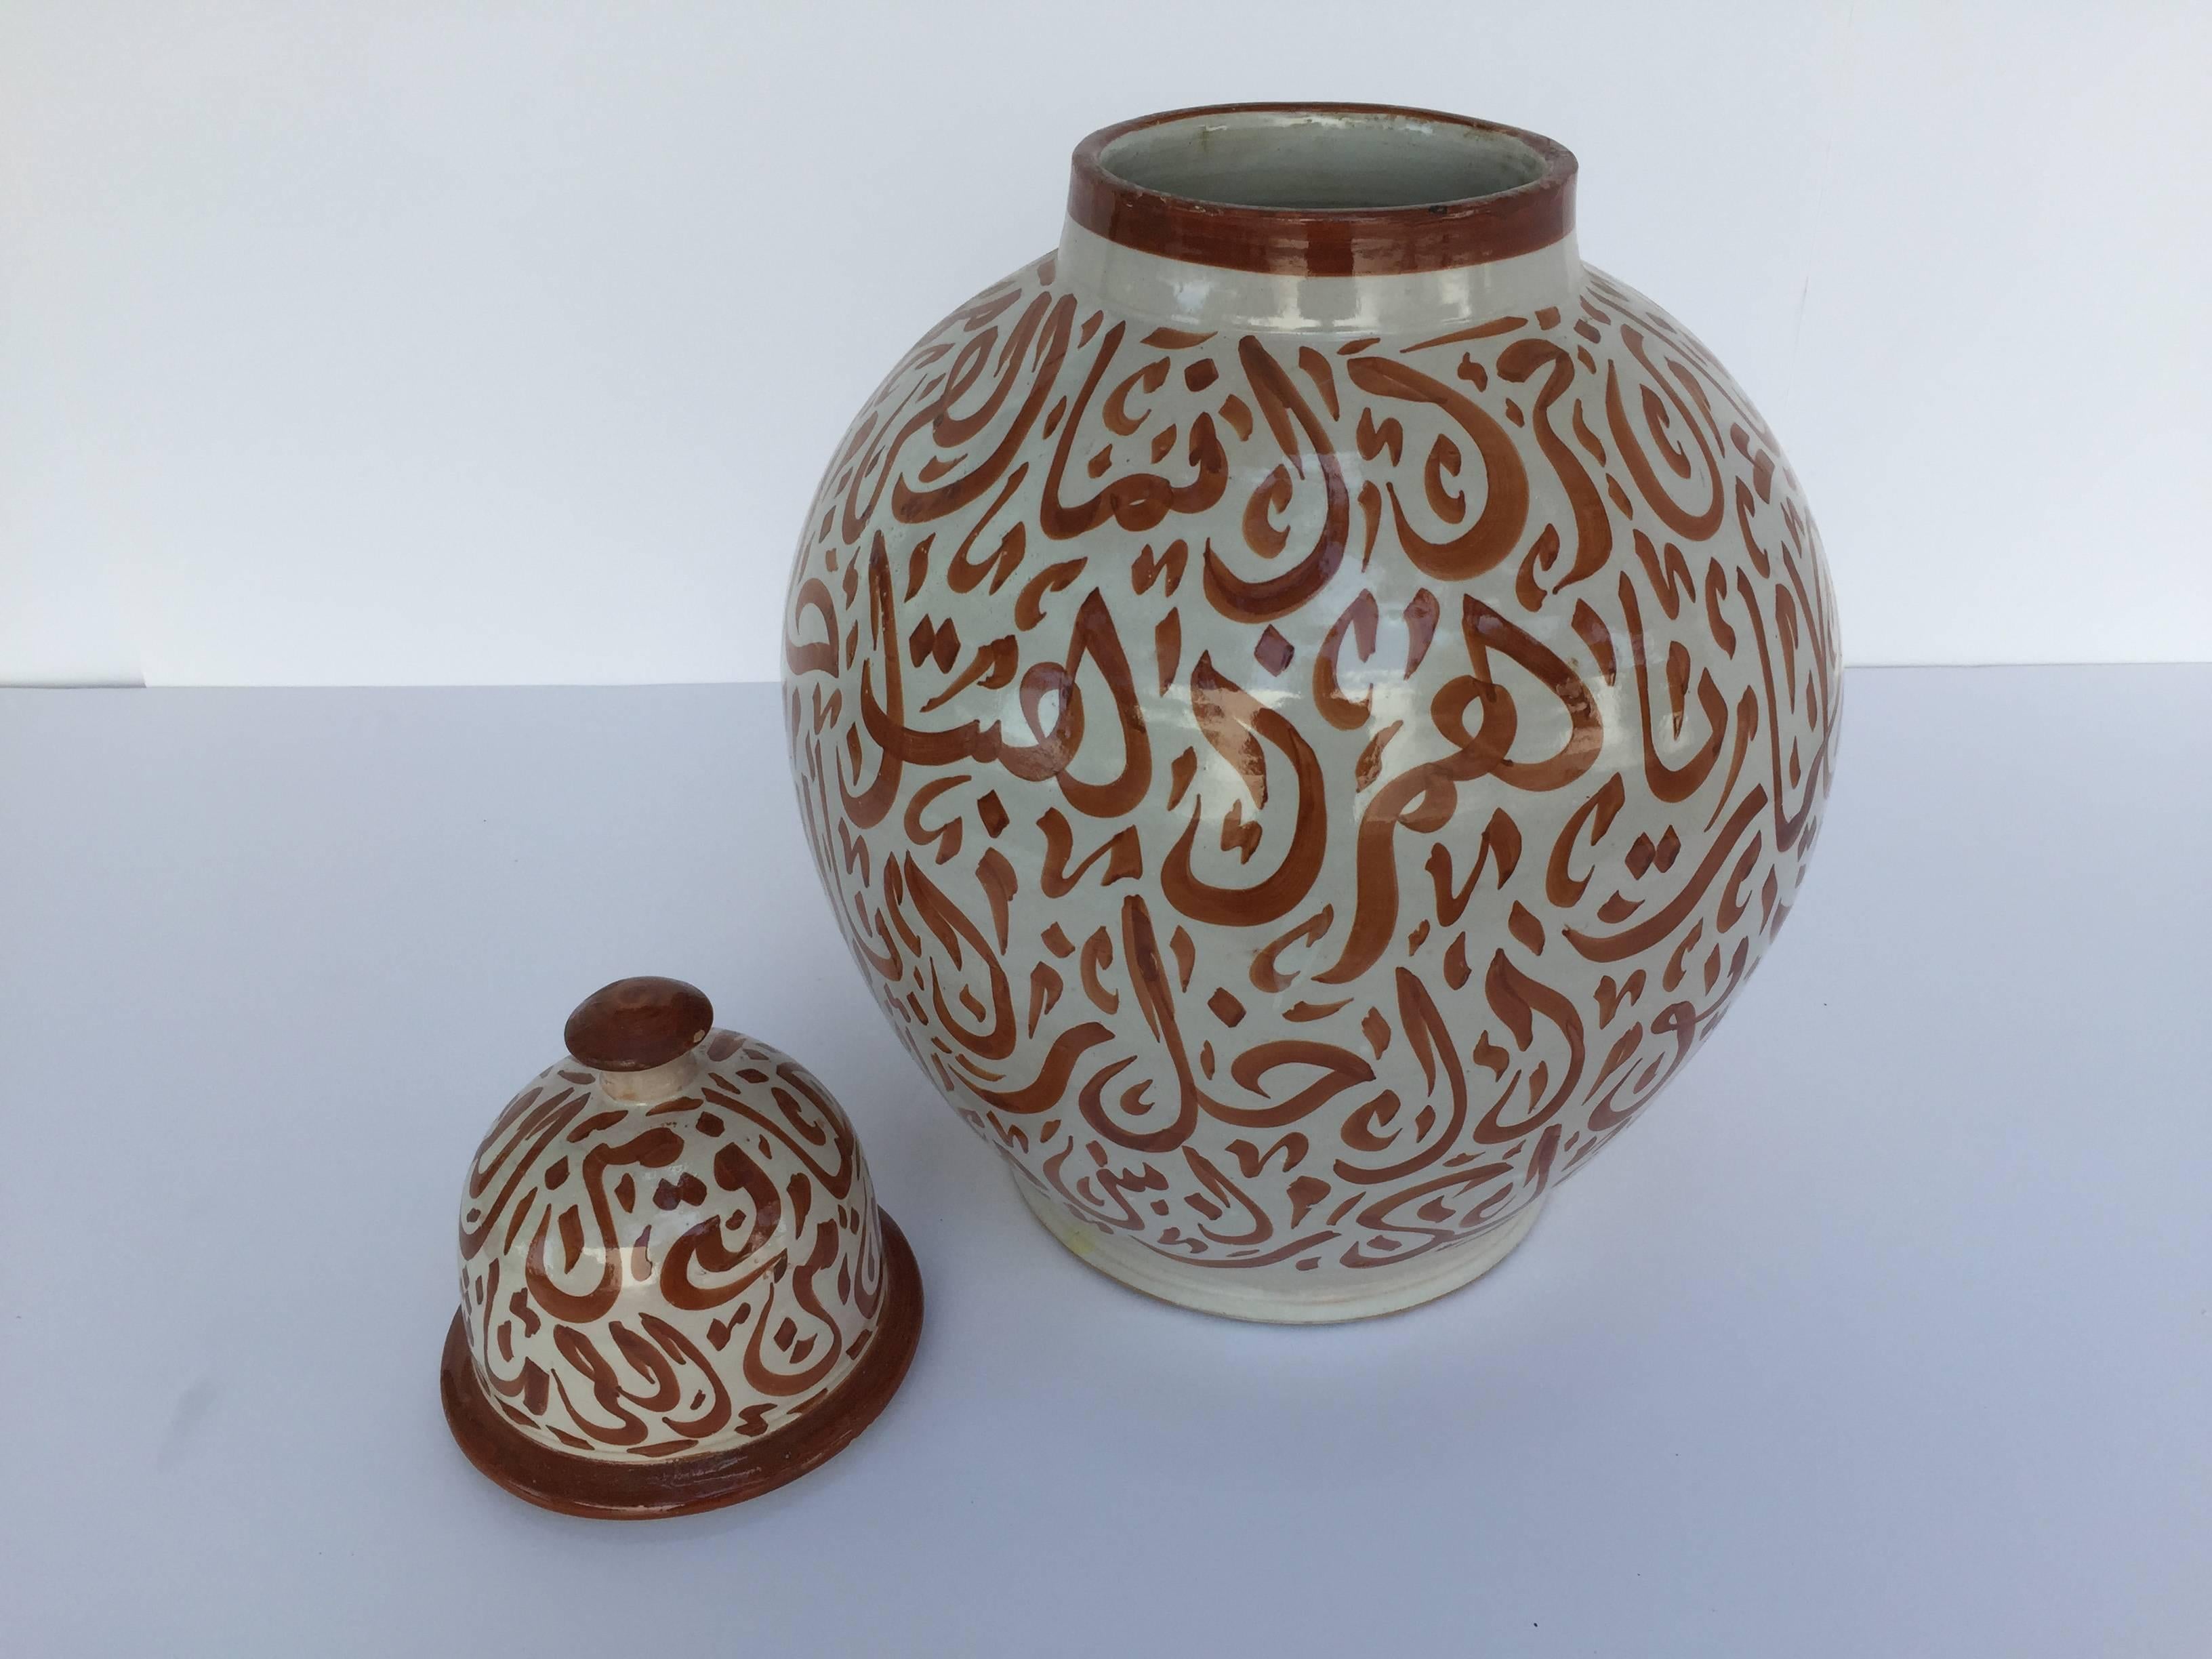 20th Century Moroccan Ceramic Lidded Urn from Fez with Arabic Calligraphy Writing For Sale